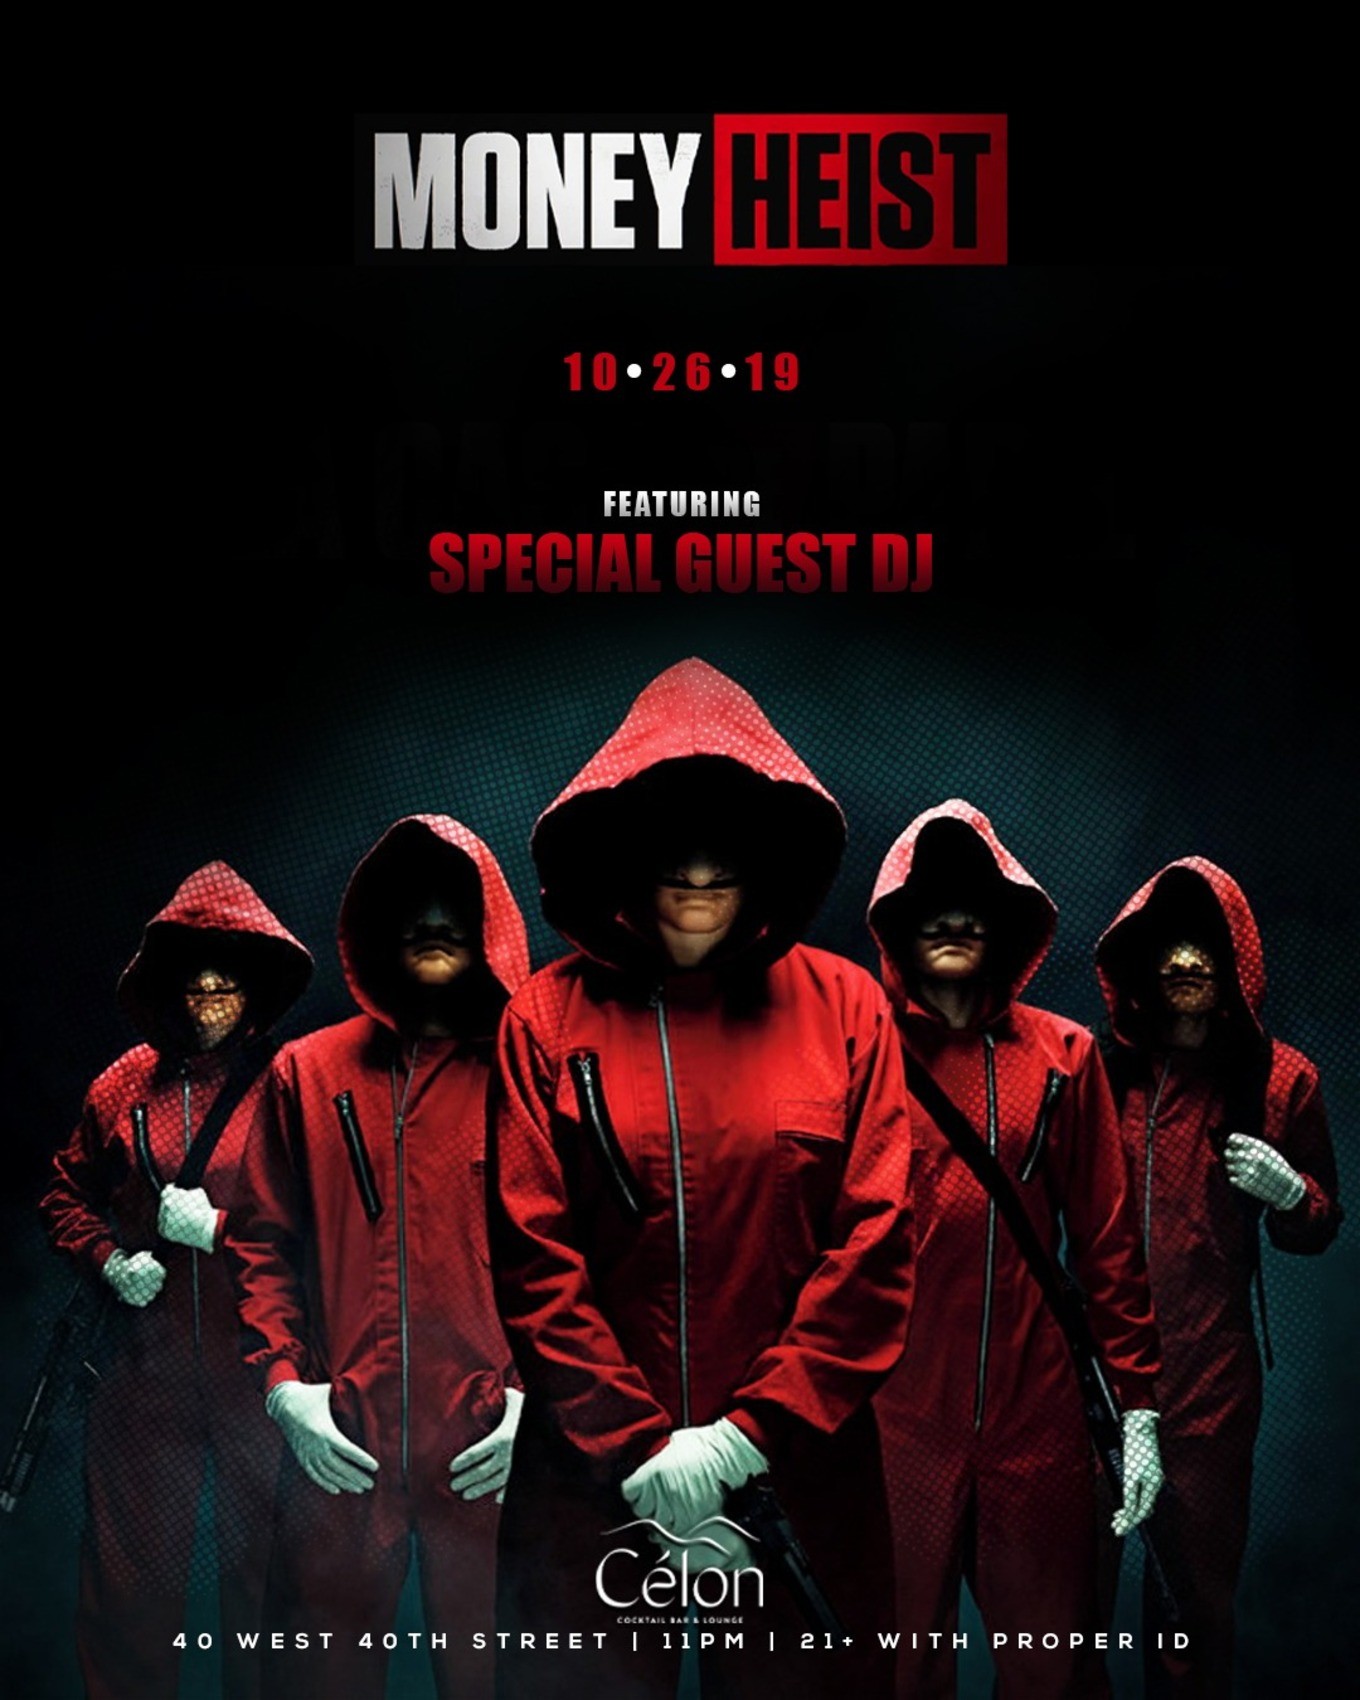 Money Heist Poster Awesome HD Wallpaper